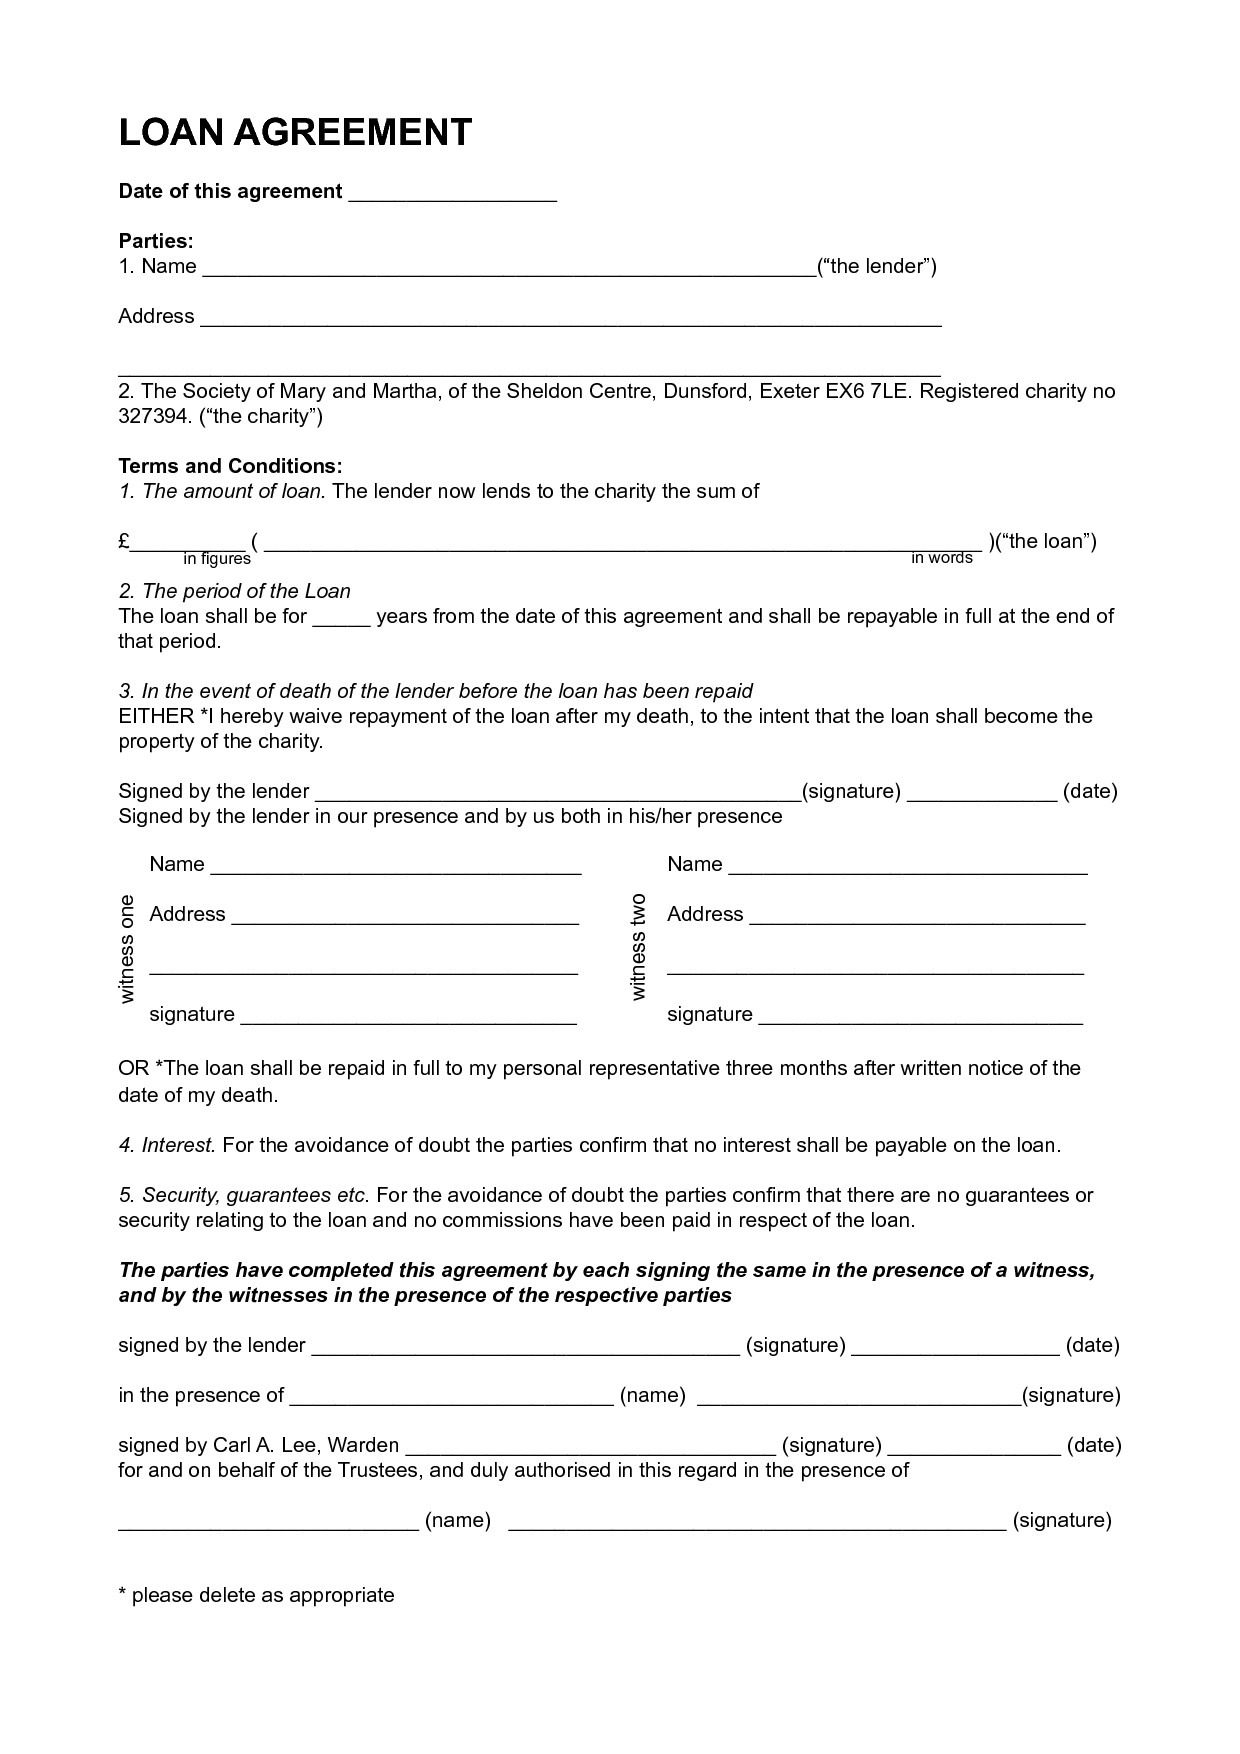 Excellent Personal Loan Agreement Template Format Between Friends 